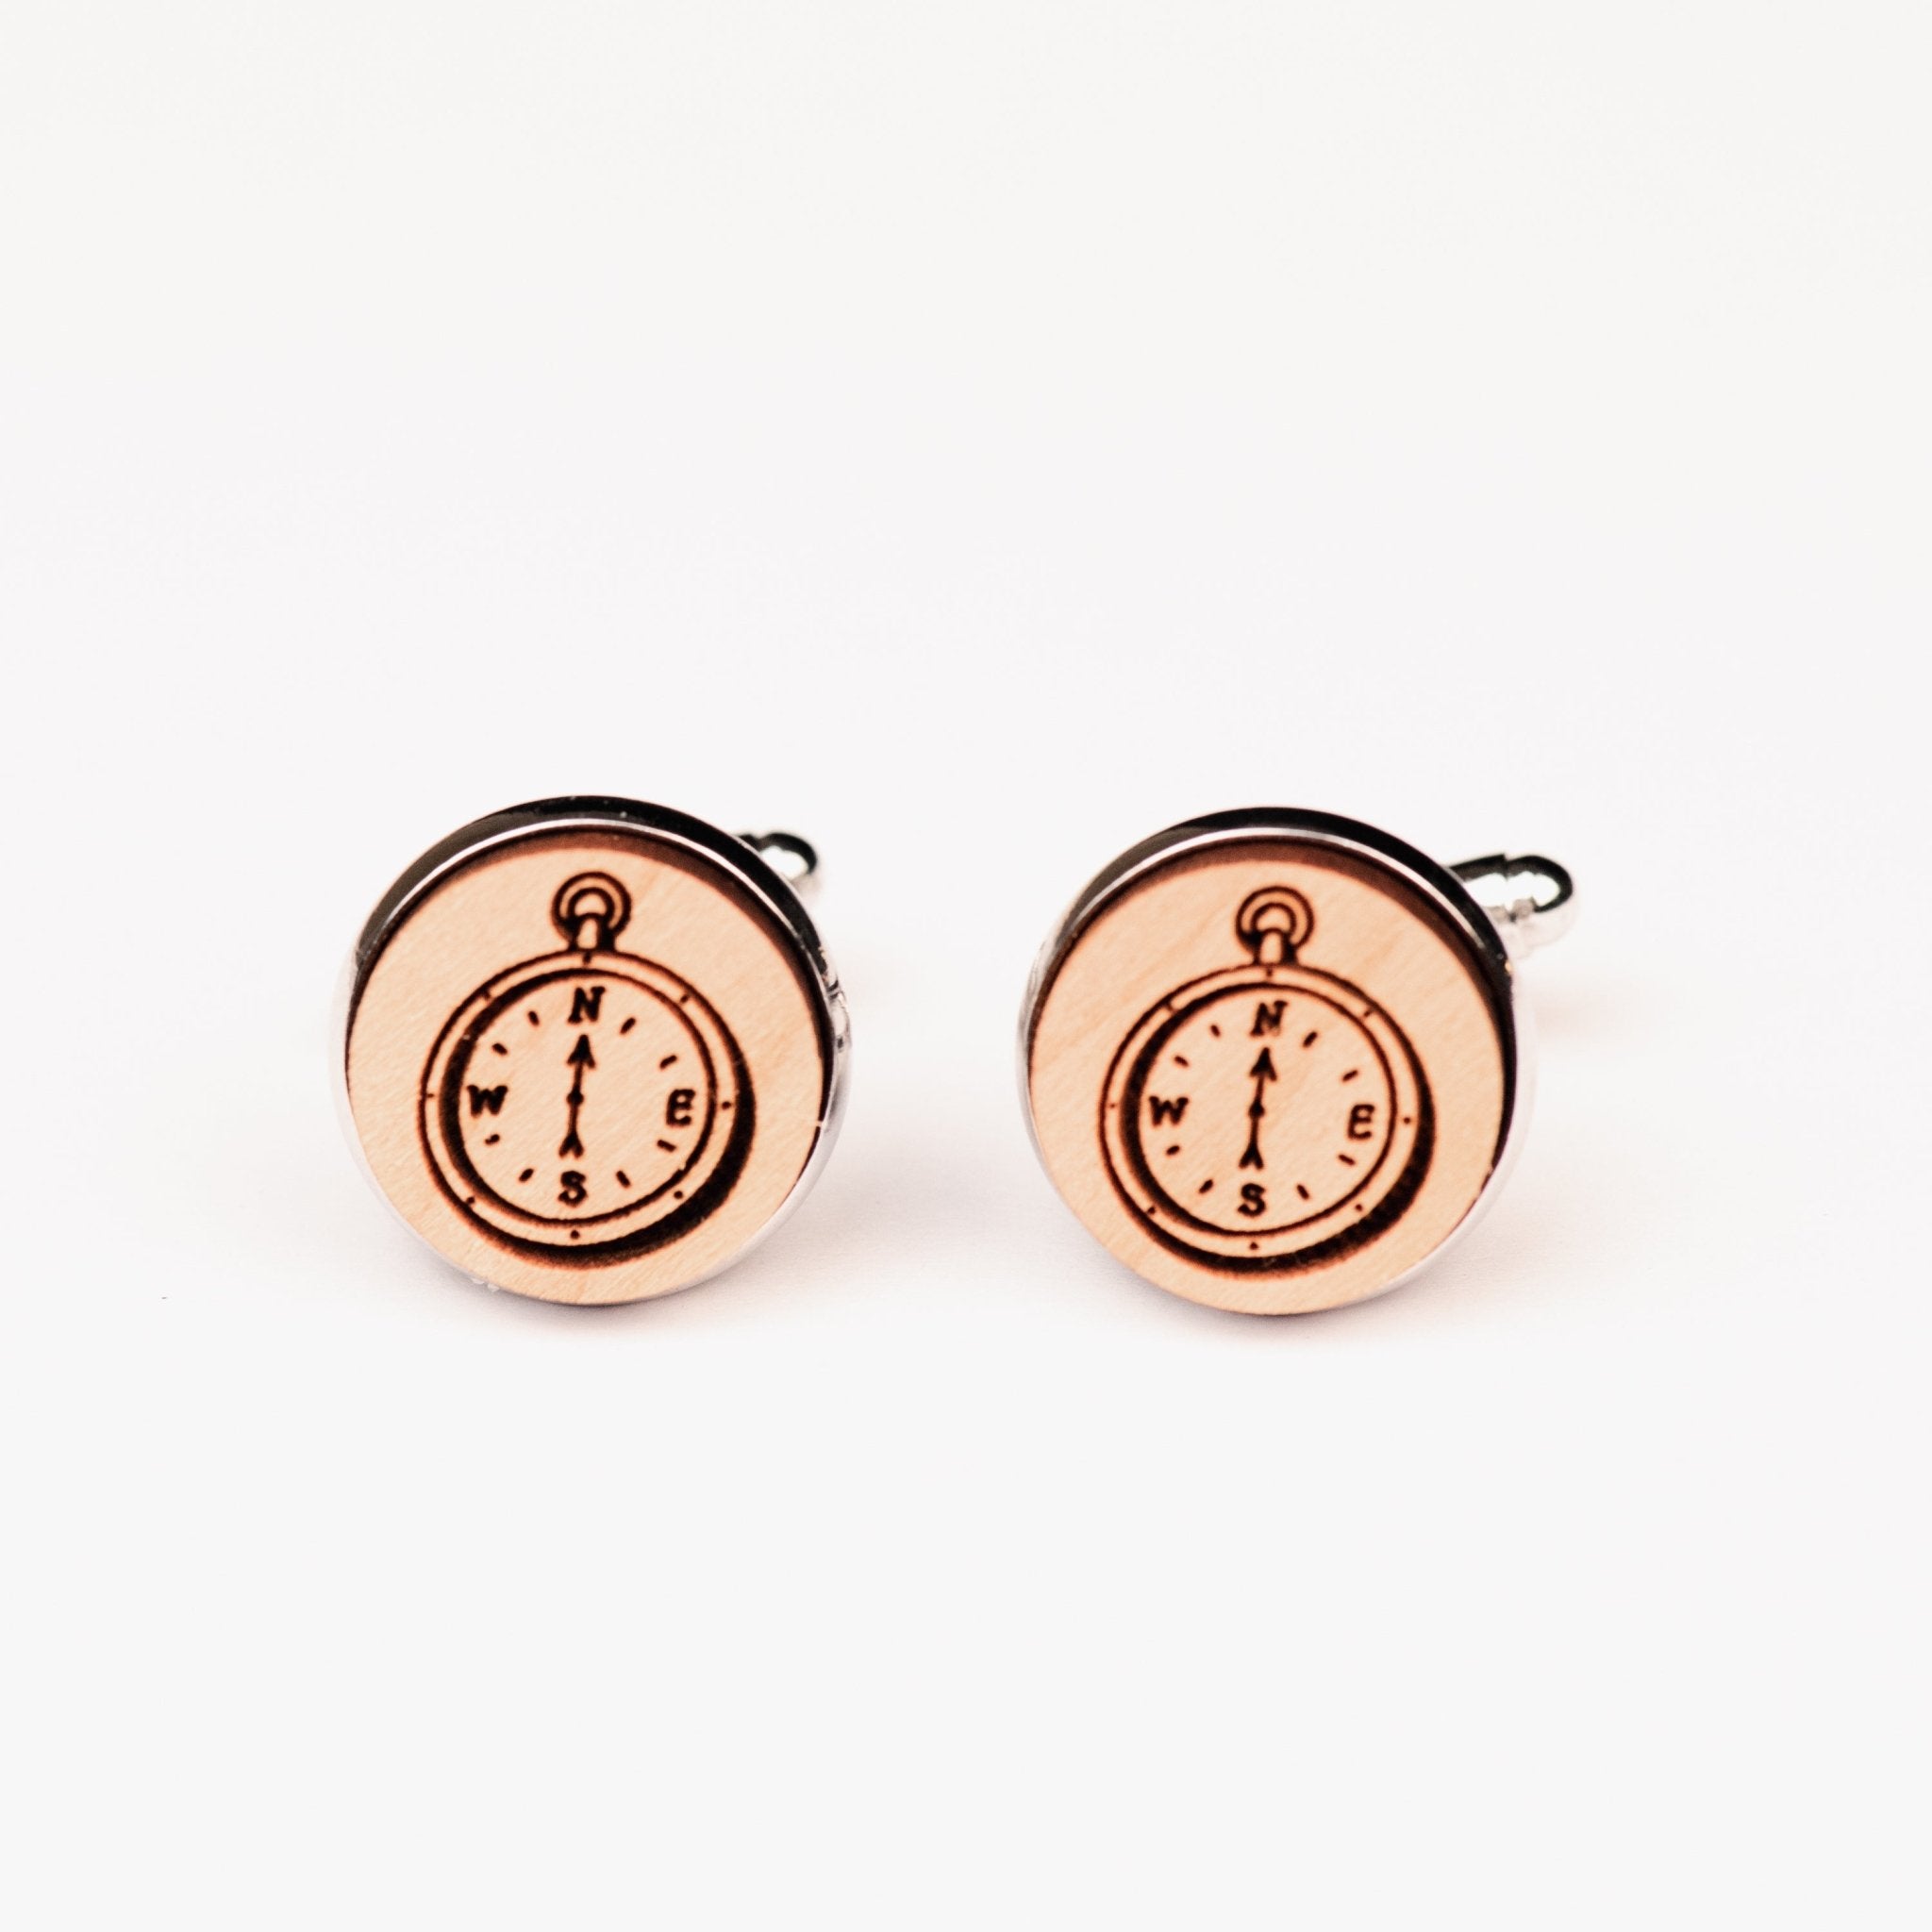 Doodle Compass Cherry Wood Cufflinks - CT35089 - Robin Valley Official Store